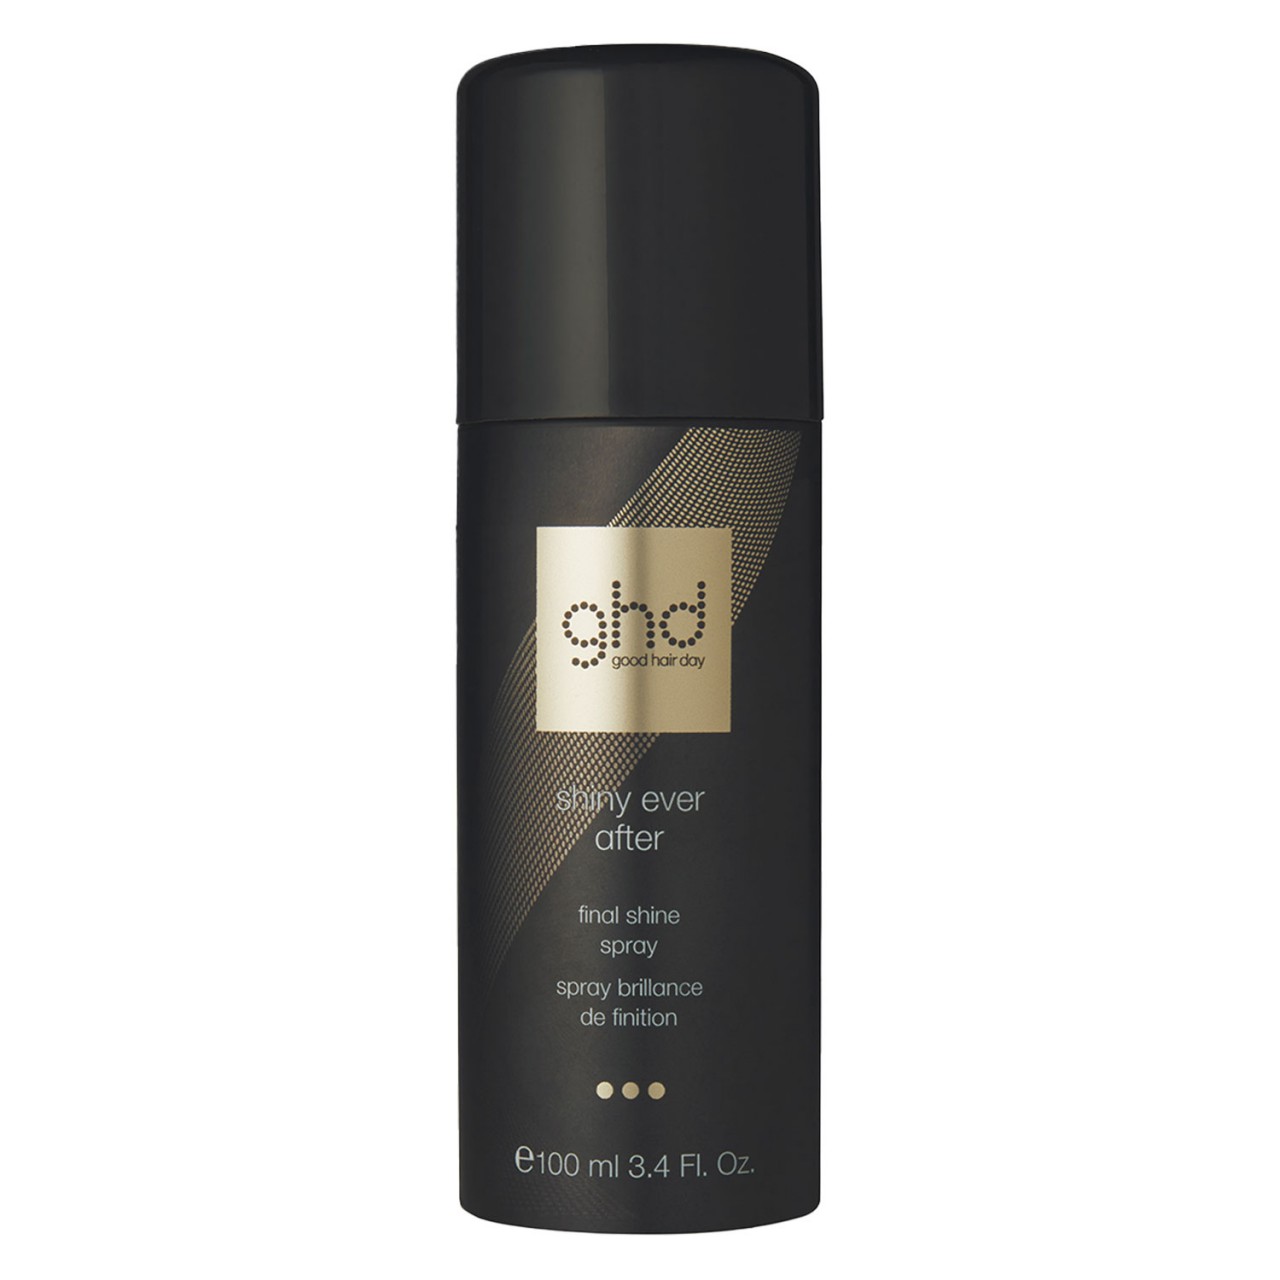 ghd Heat Protection Styling System - Shiny Ever After Final Shine Spray von ghd